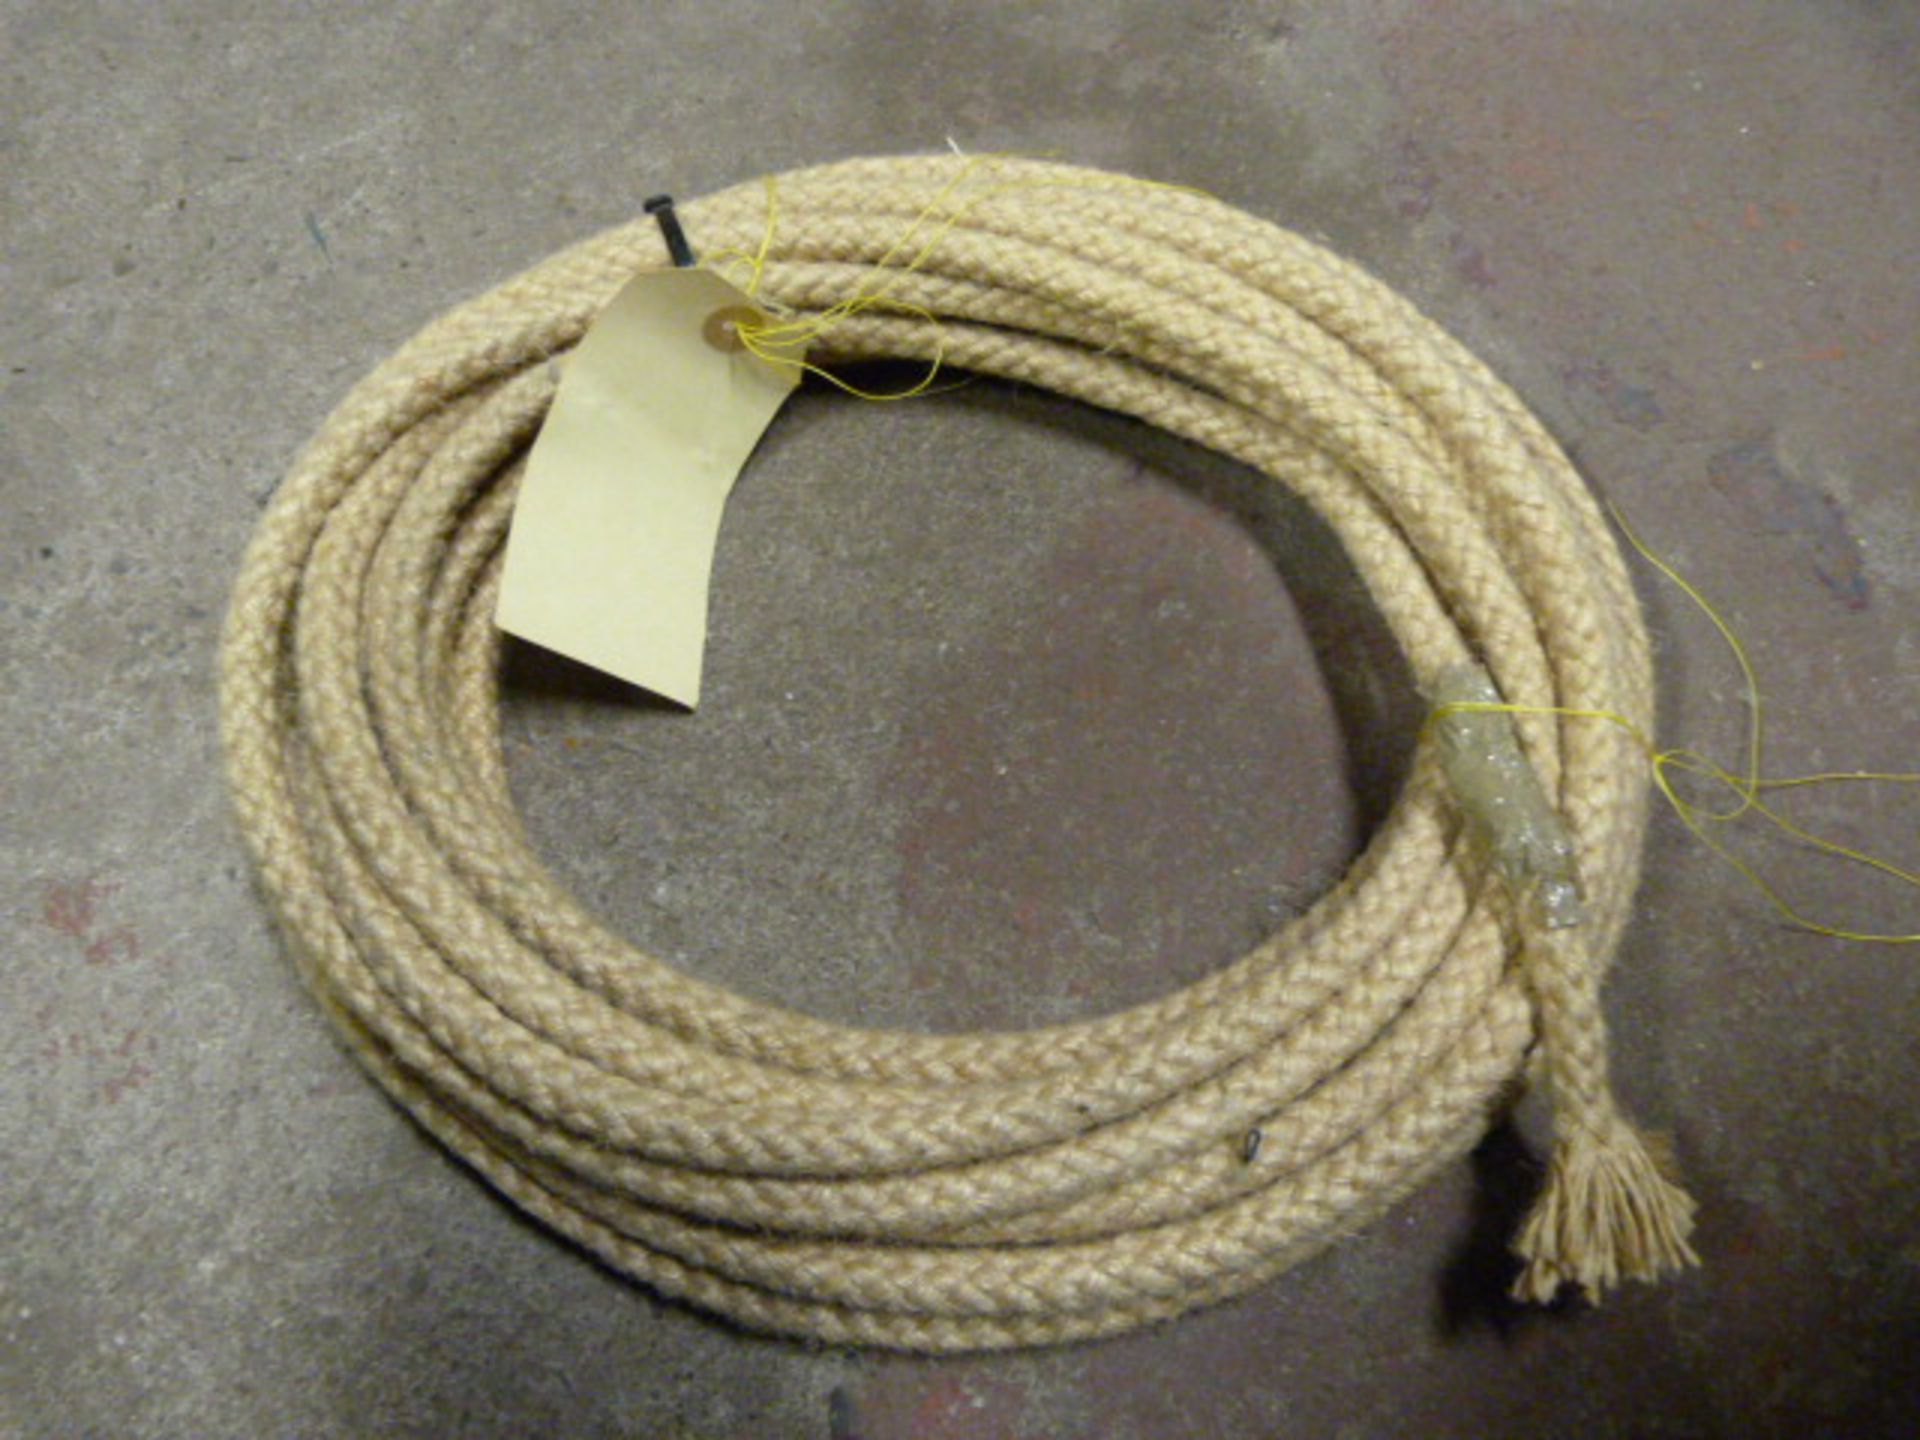 9m Length of Wire Covered with Rope